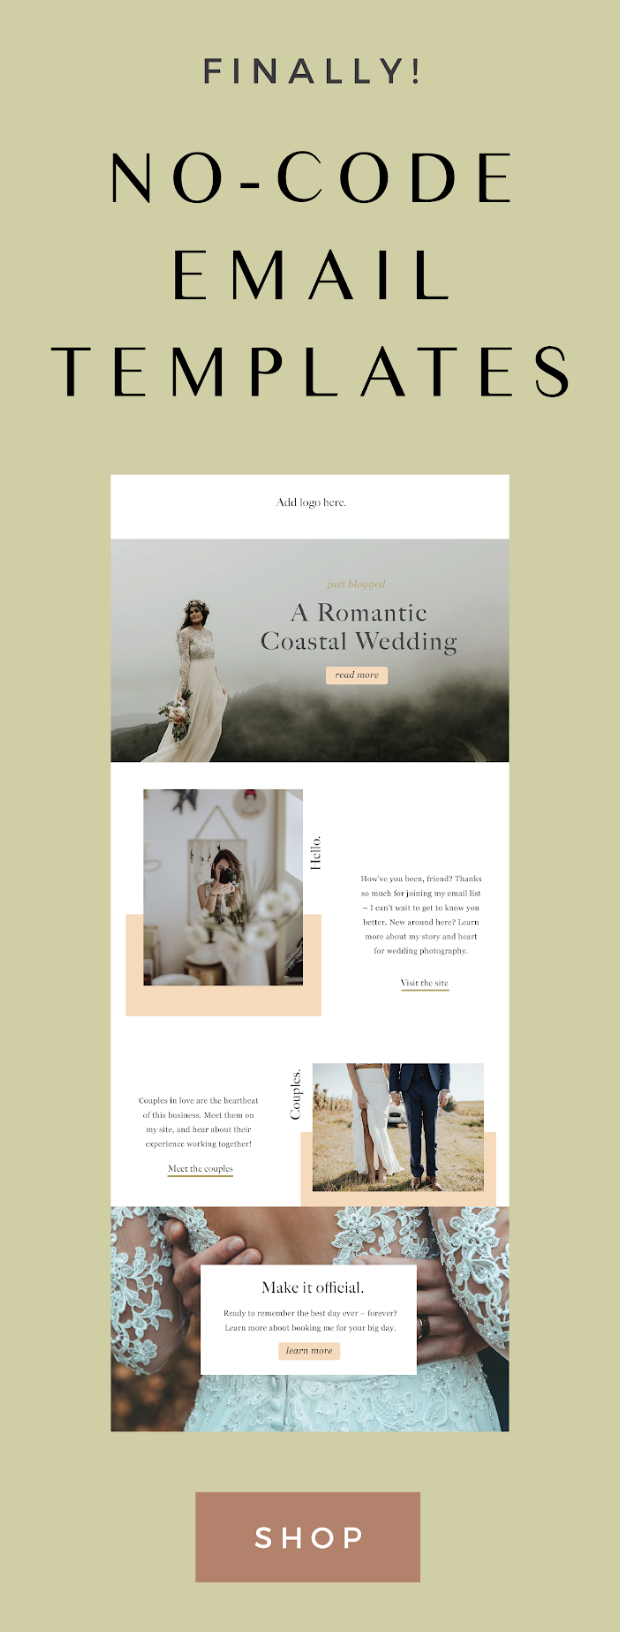 Eryn Customizable Email Template Lindsay Scholz Studio Creative Studio For Woman Owned Businesses In 2020 Email Newsletter Design Email Design Newsletter Design Templates